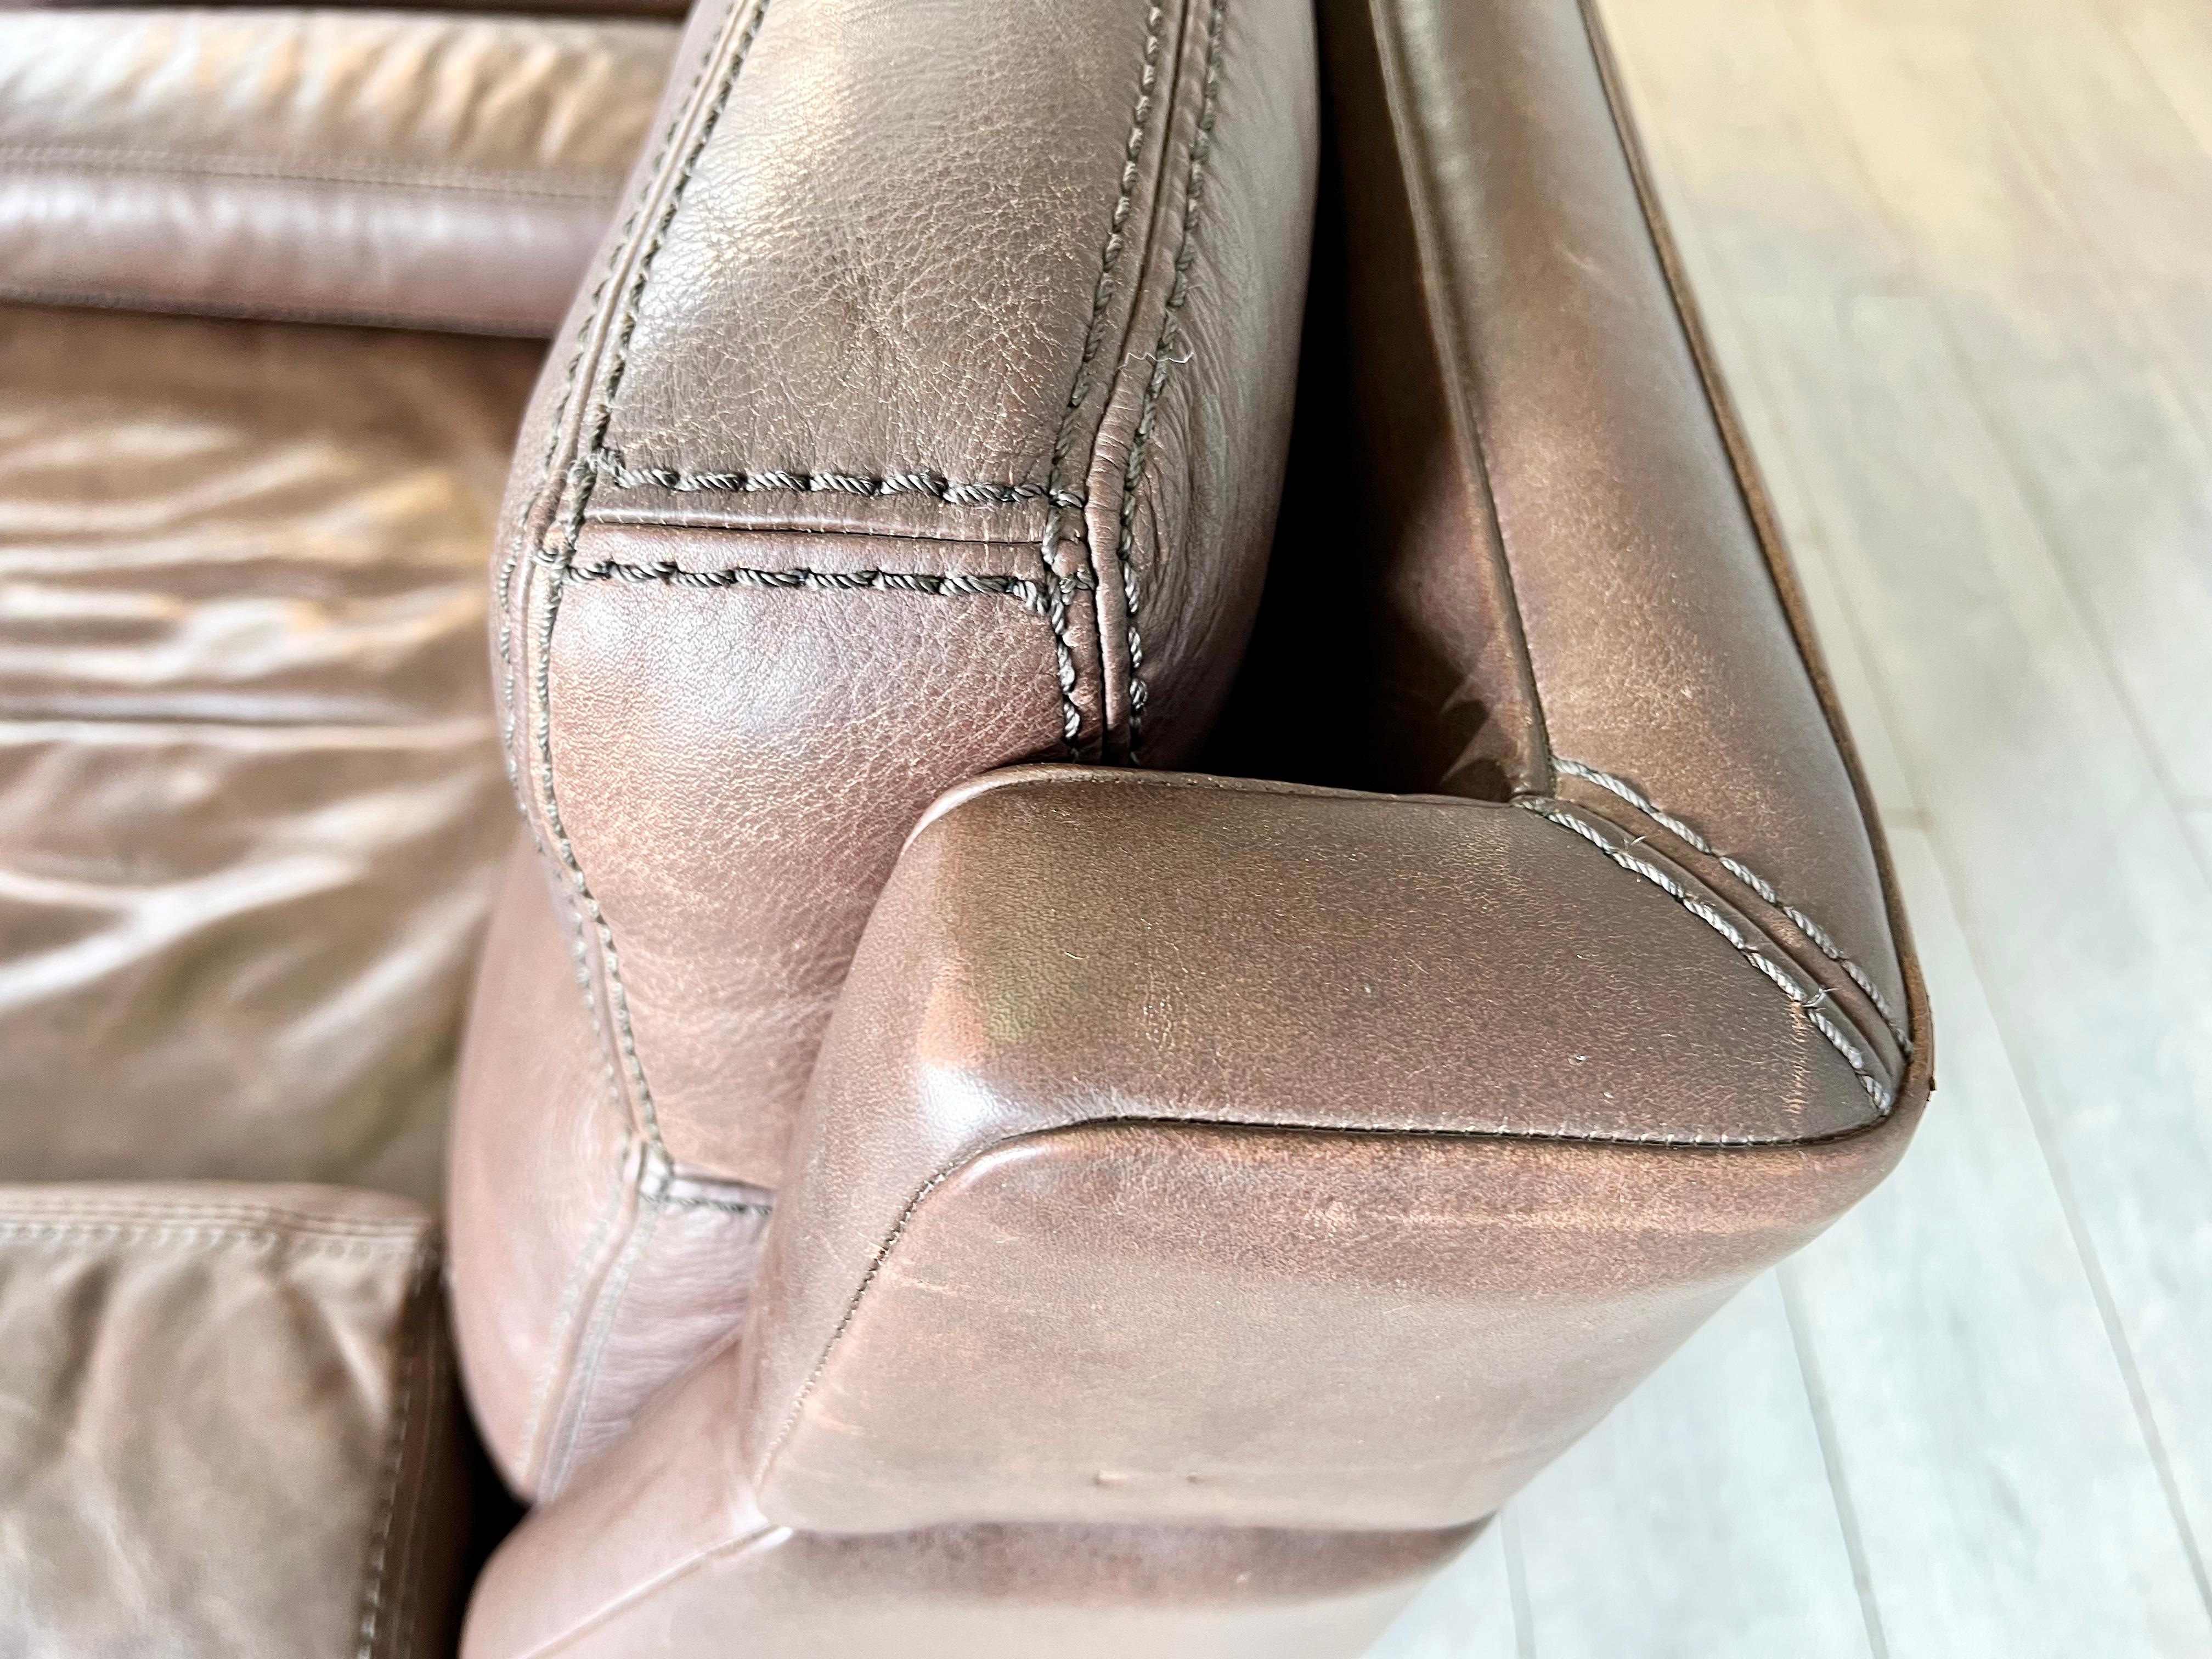 Original Vintage Modern Leather Armchairs by Durlet, Belgium, 1970s - a Pair For Sale 4